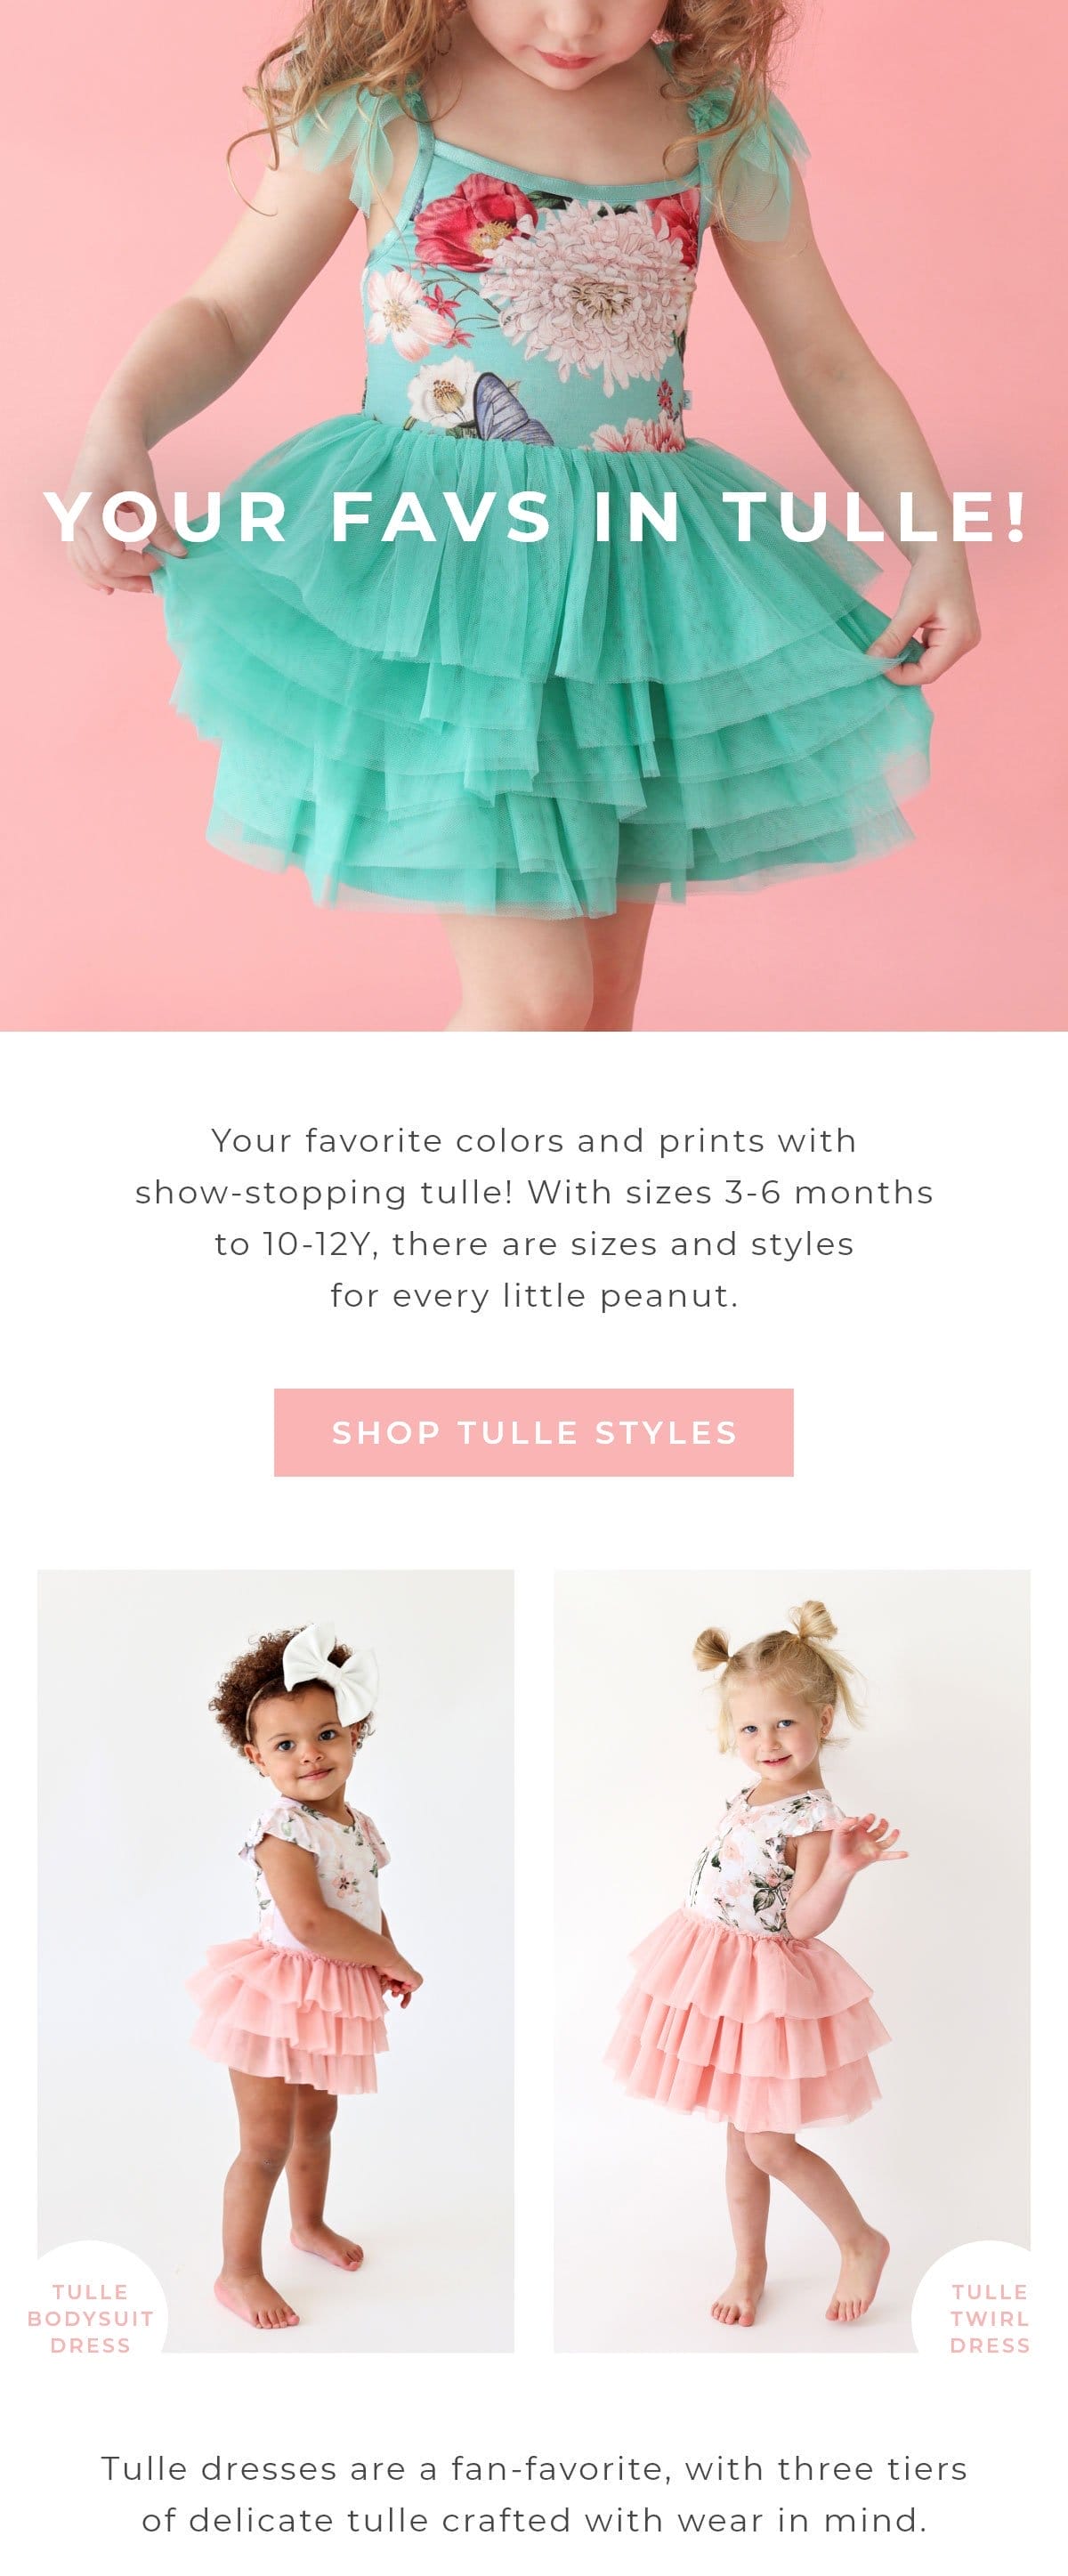 Shop Tulle Styles